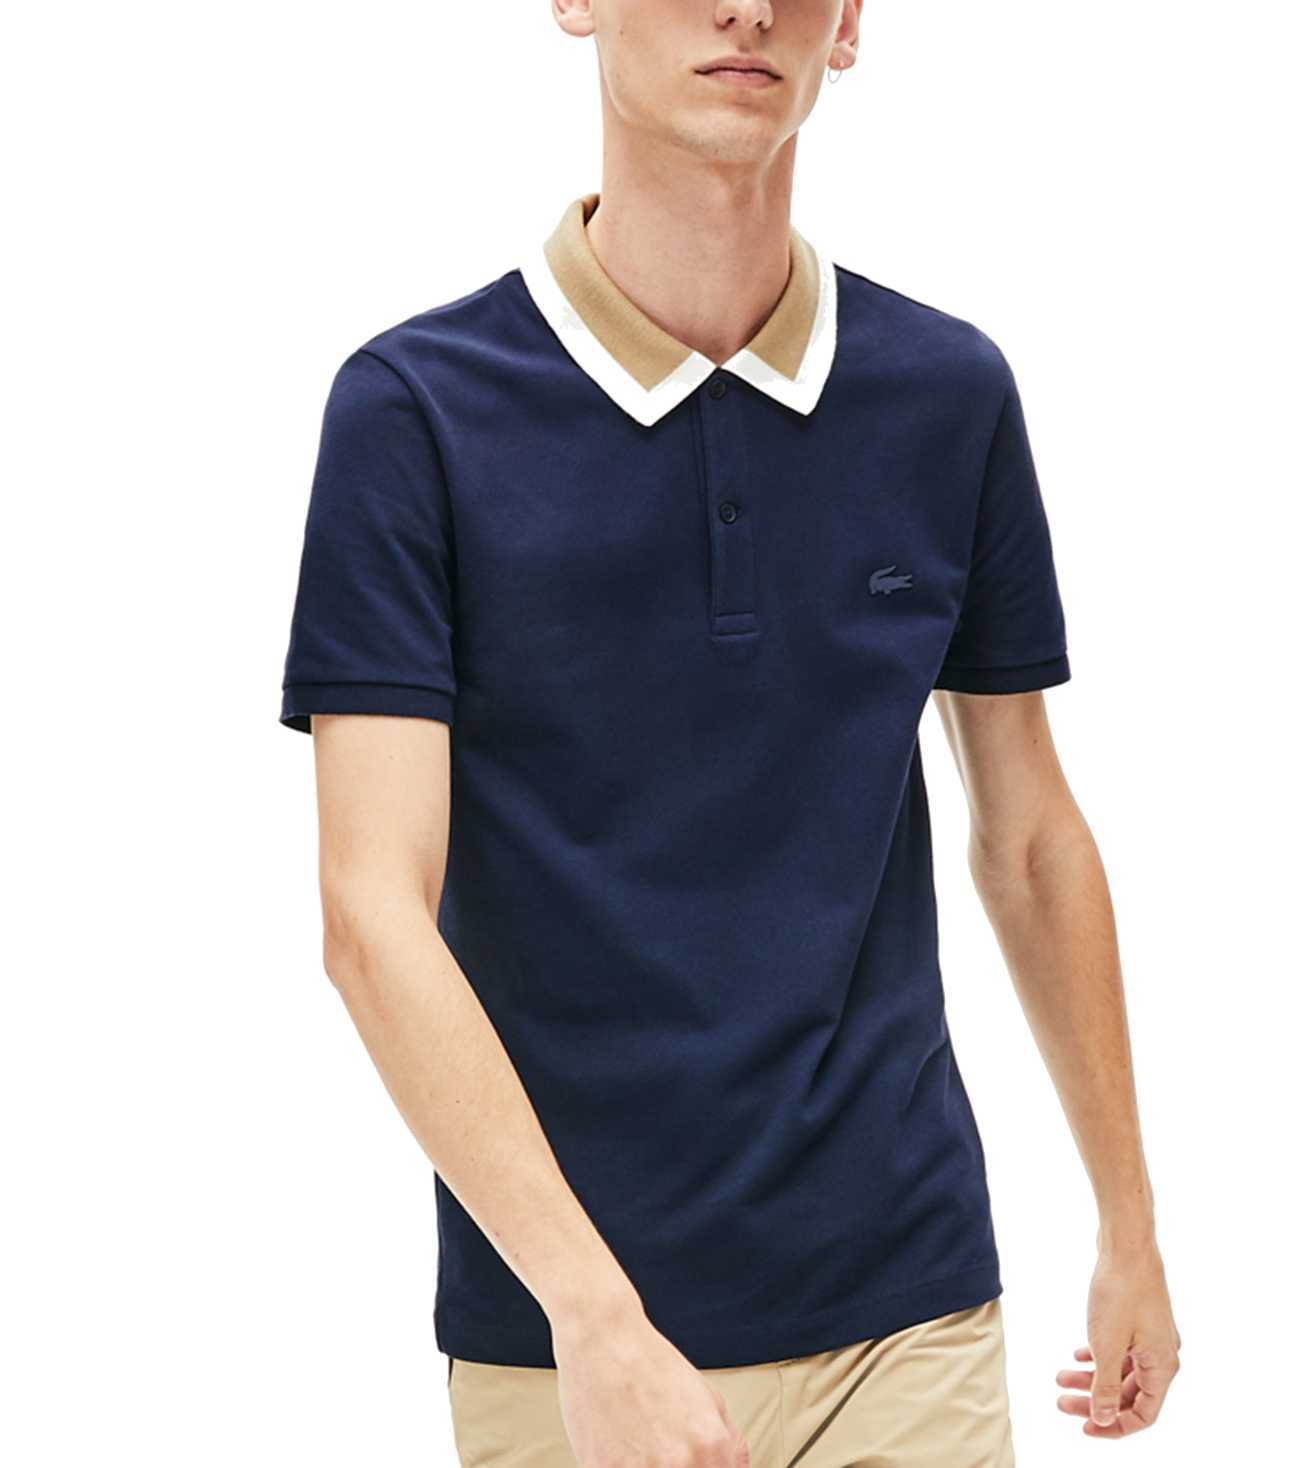 lacoste navy polo next, OFF 70%,Buy!